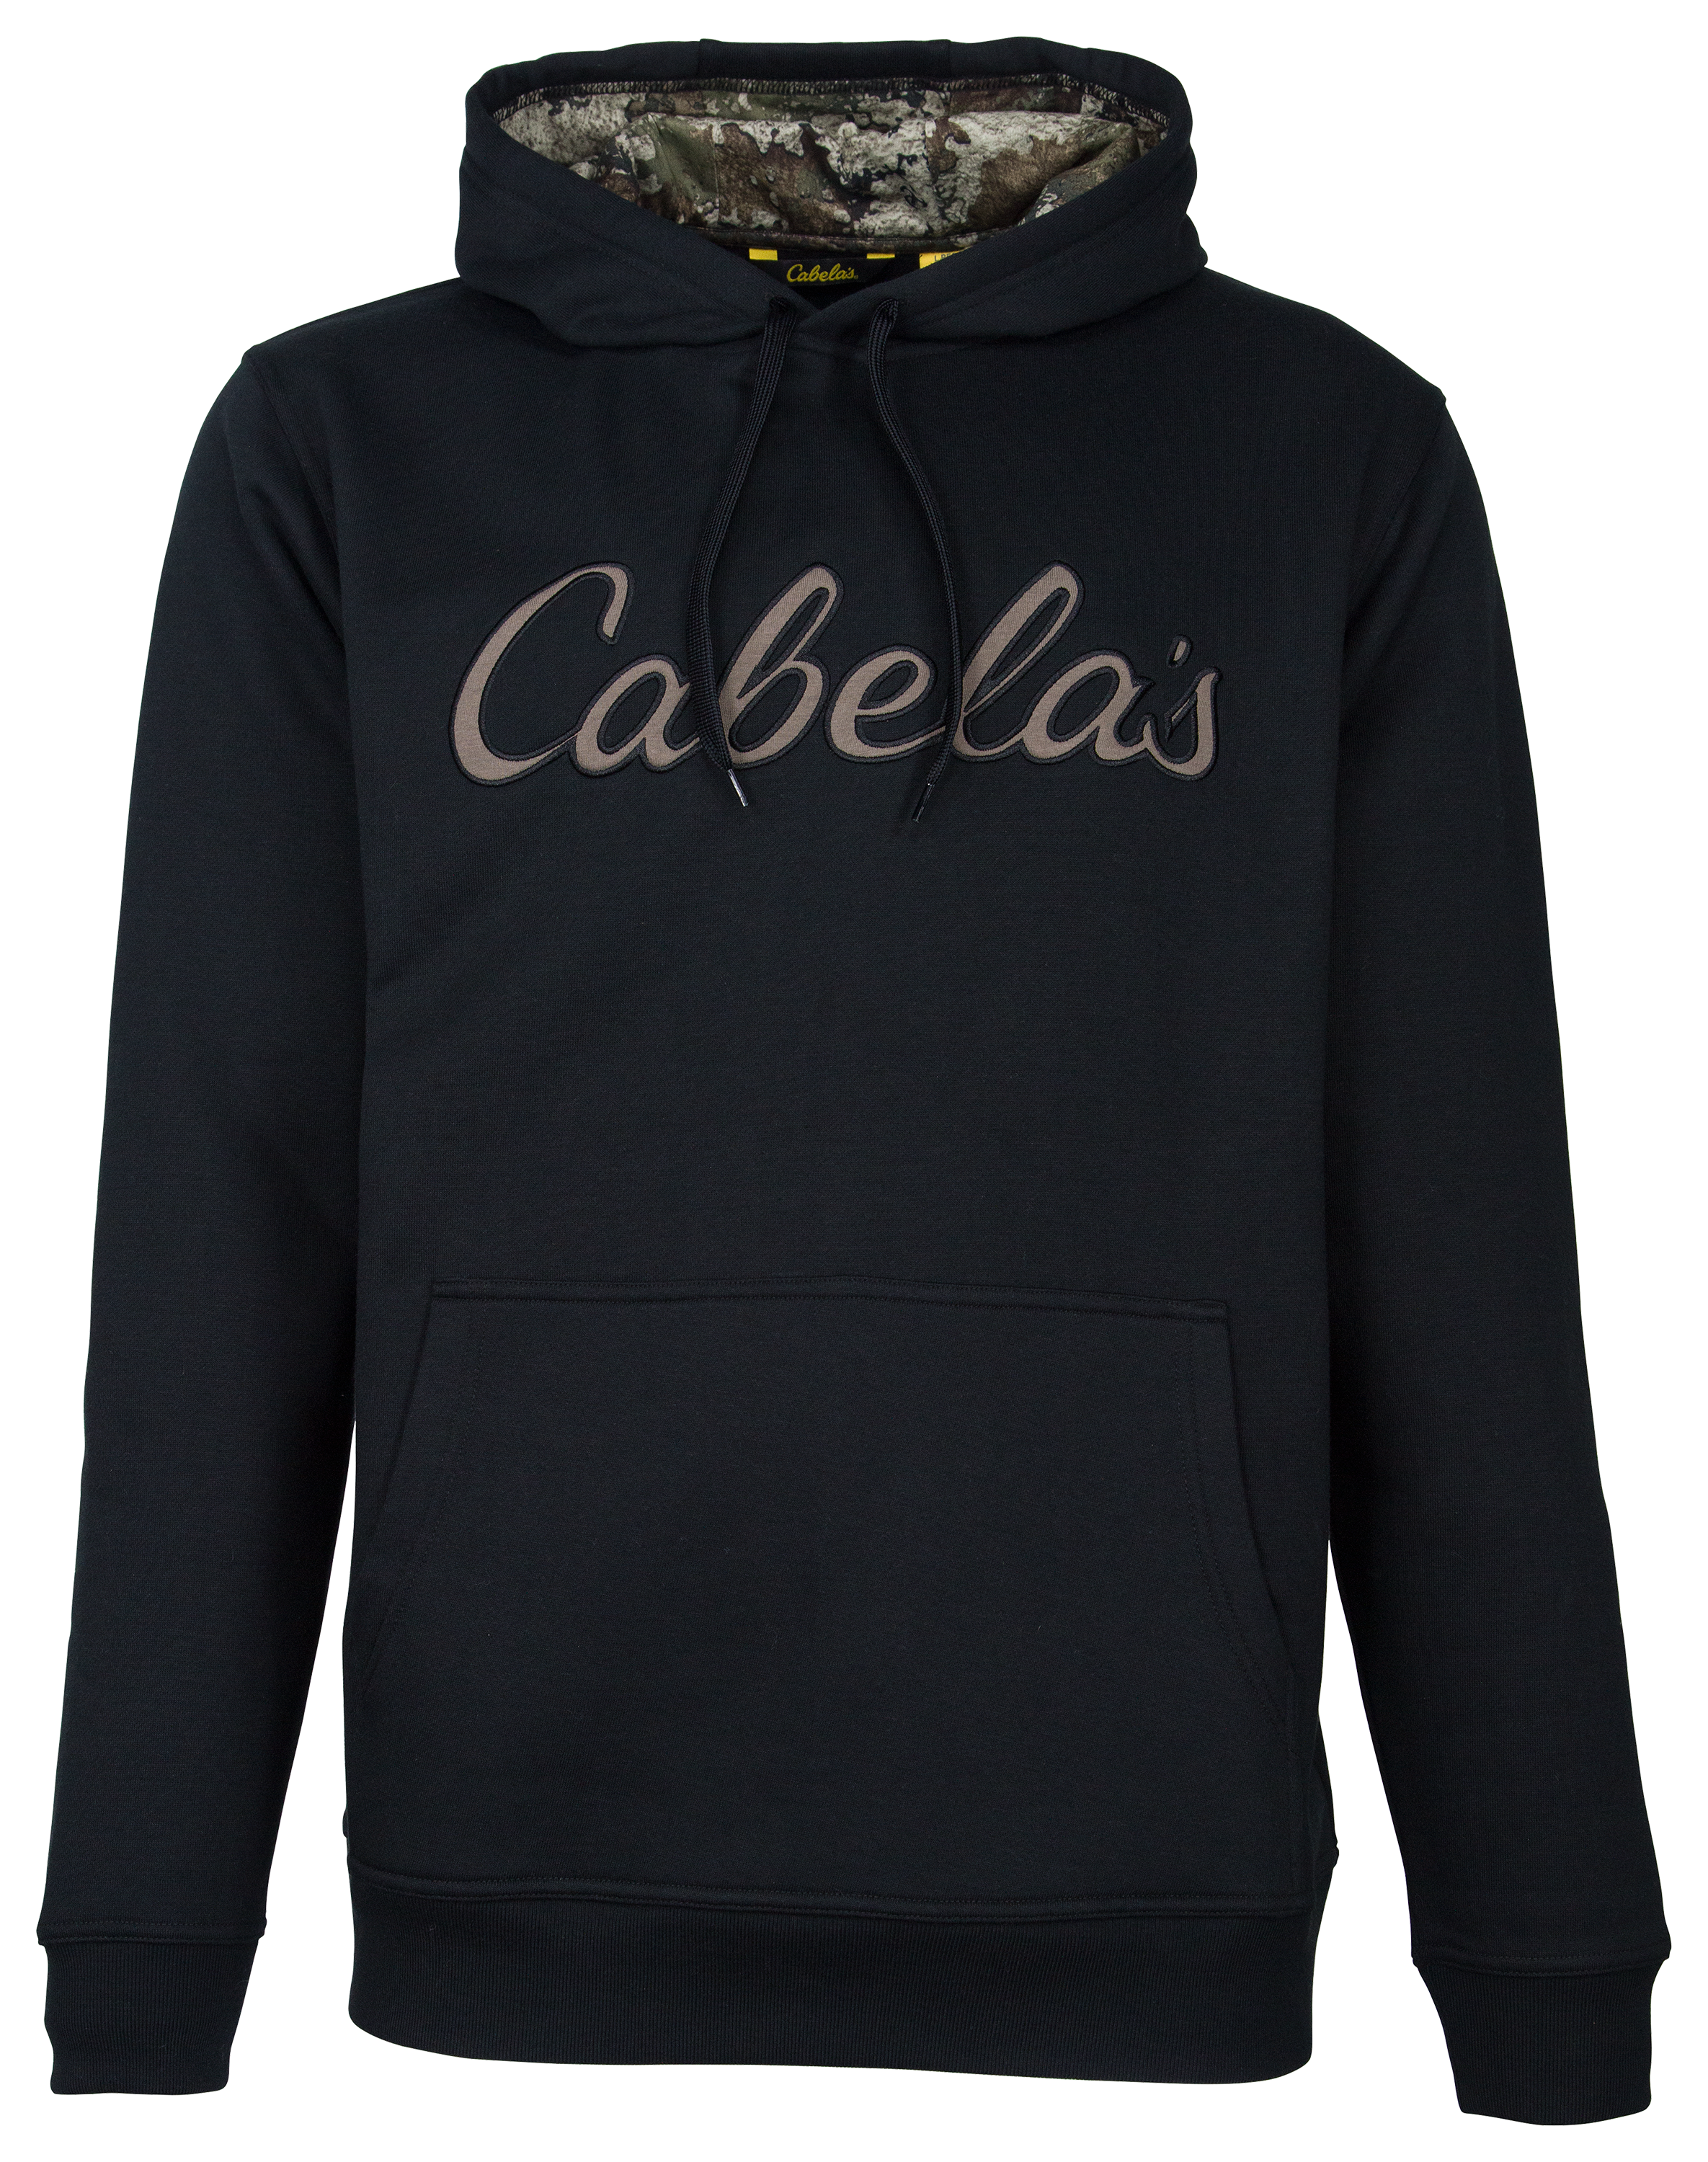 Cabela's Game Day Long-Sleeve Hoodie for Men - Olive Heather - M